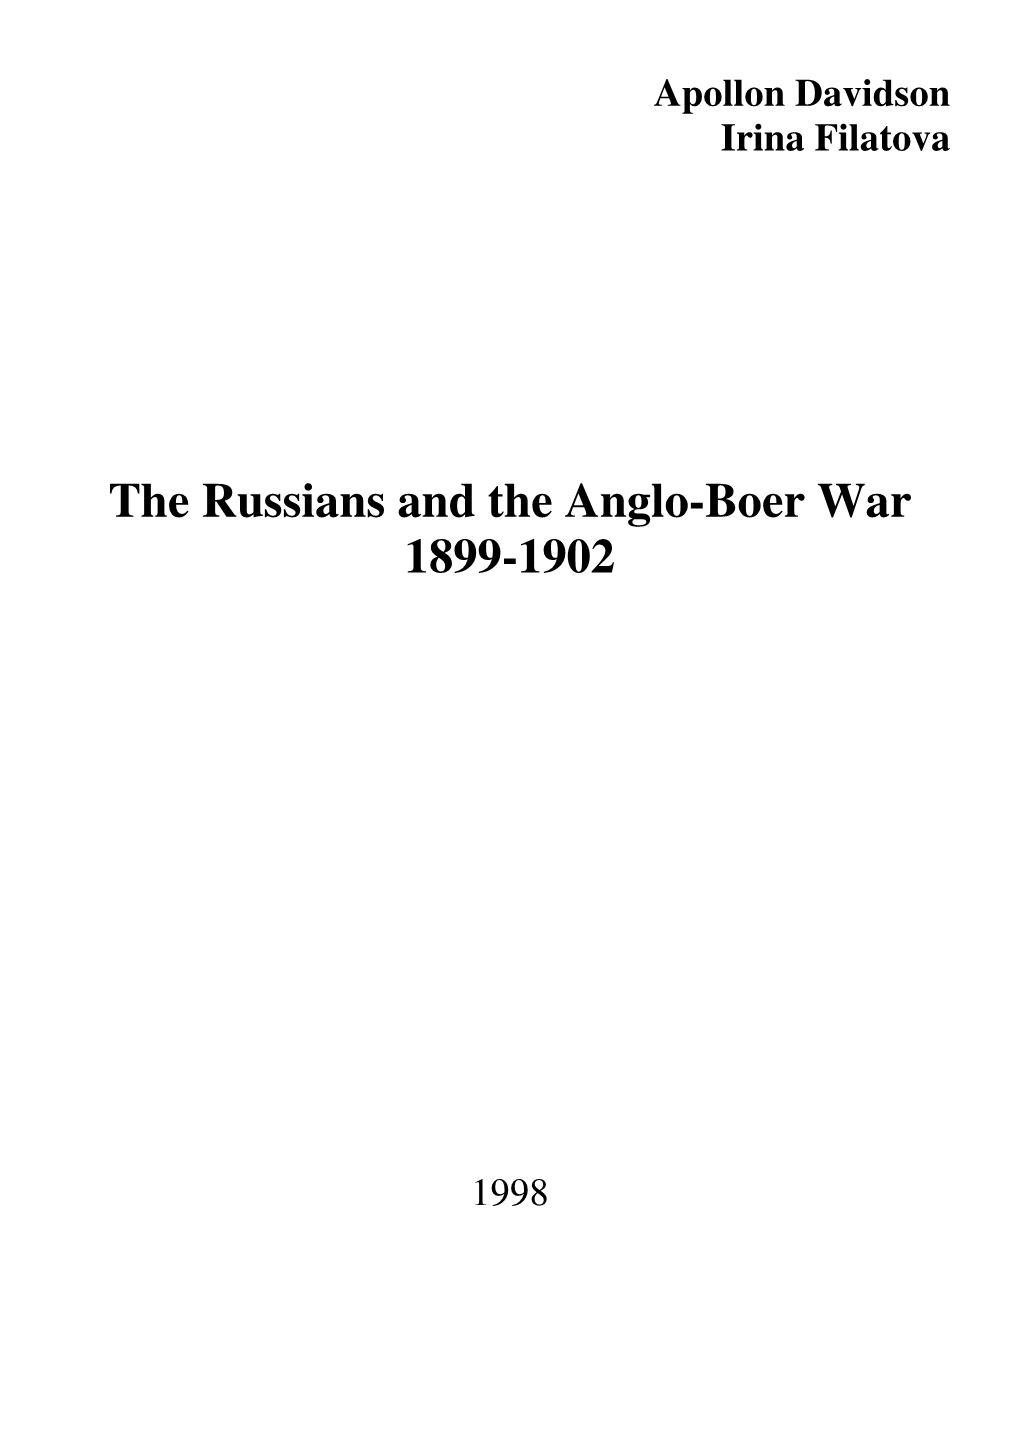 The Russians and the Anglo-Boer War 1899-1902